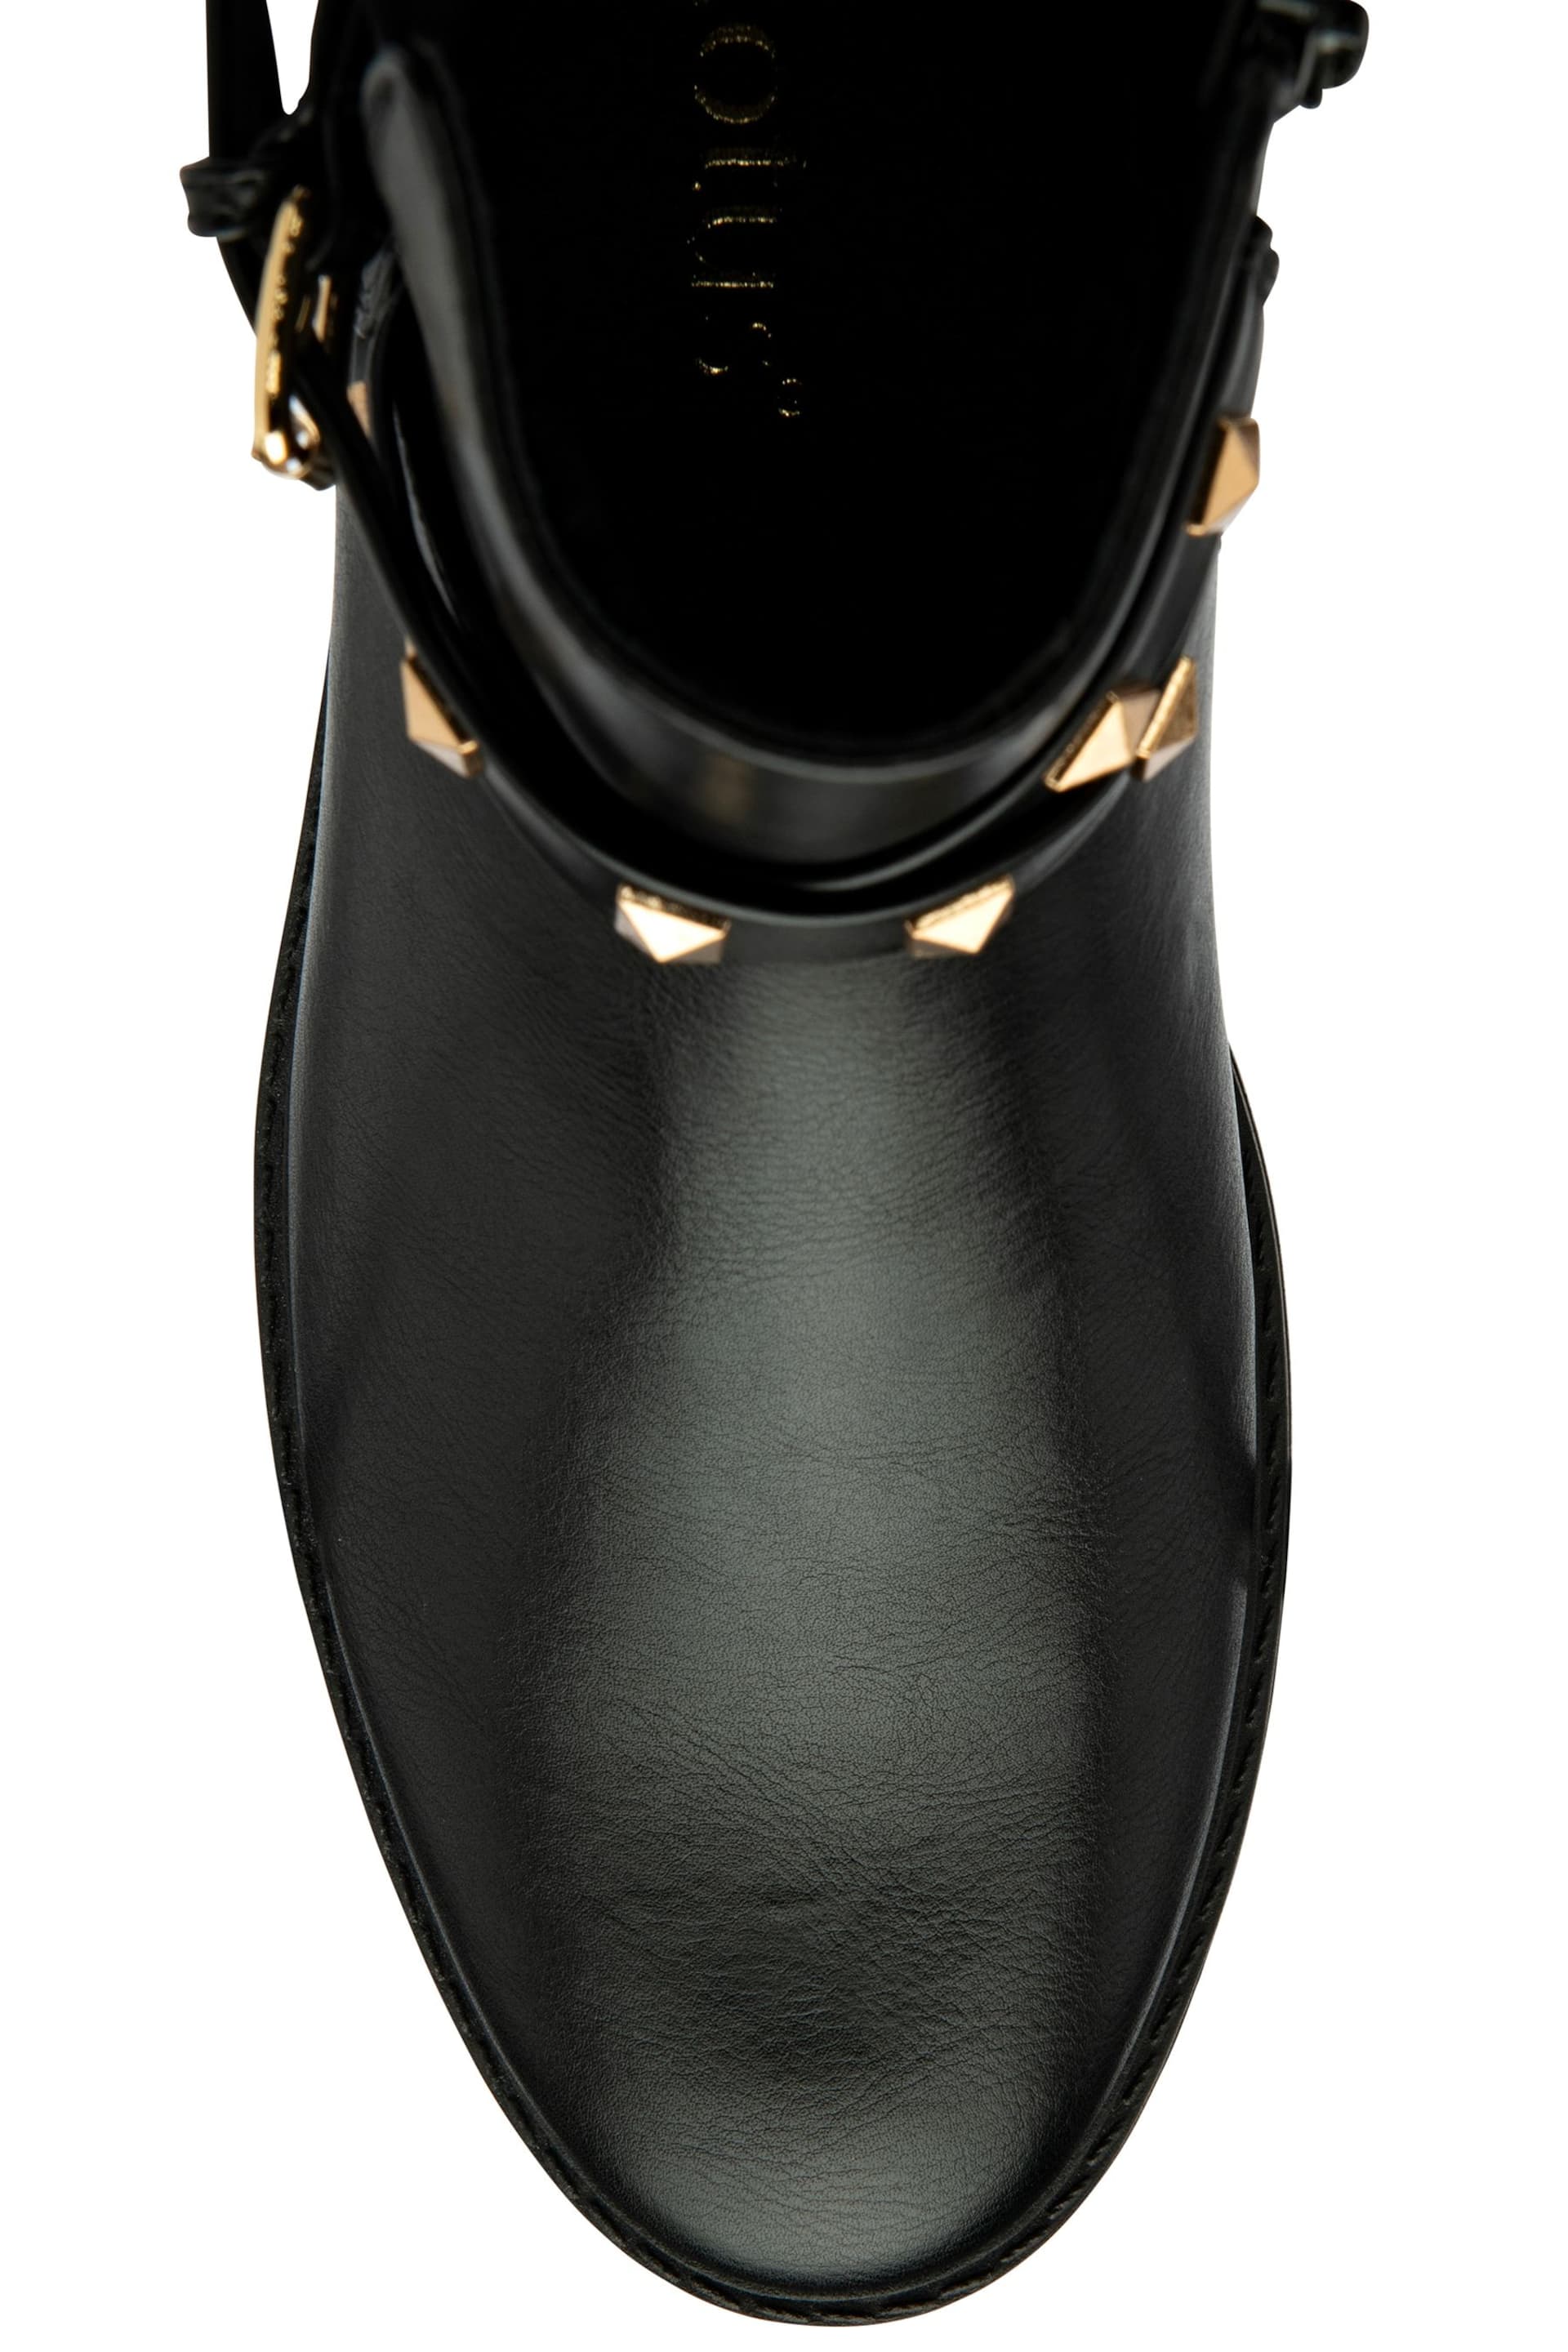 Lotus Black Gold Ankle Boots - Image 4 of 4